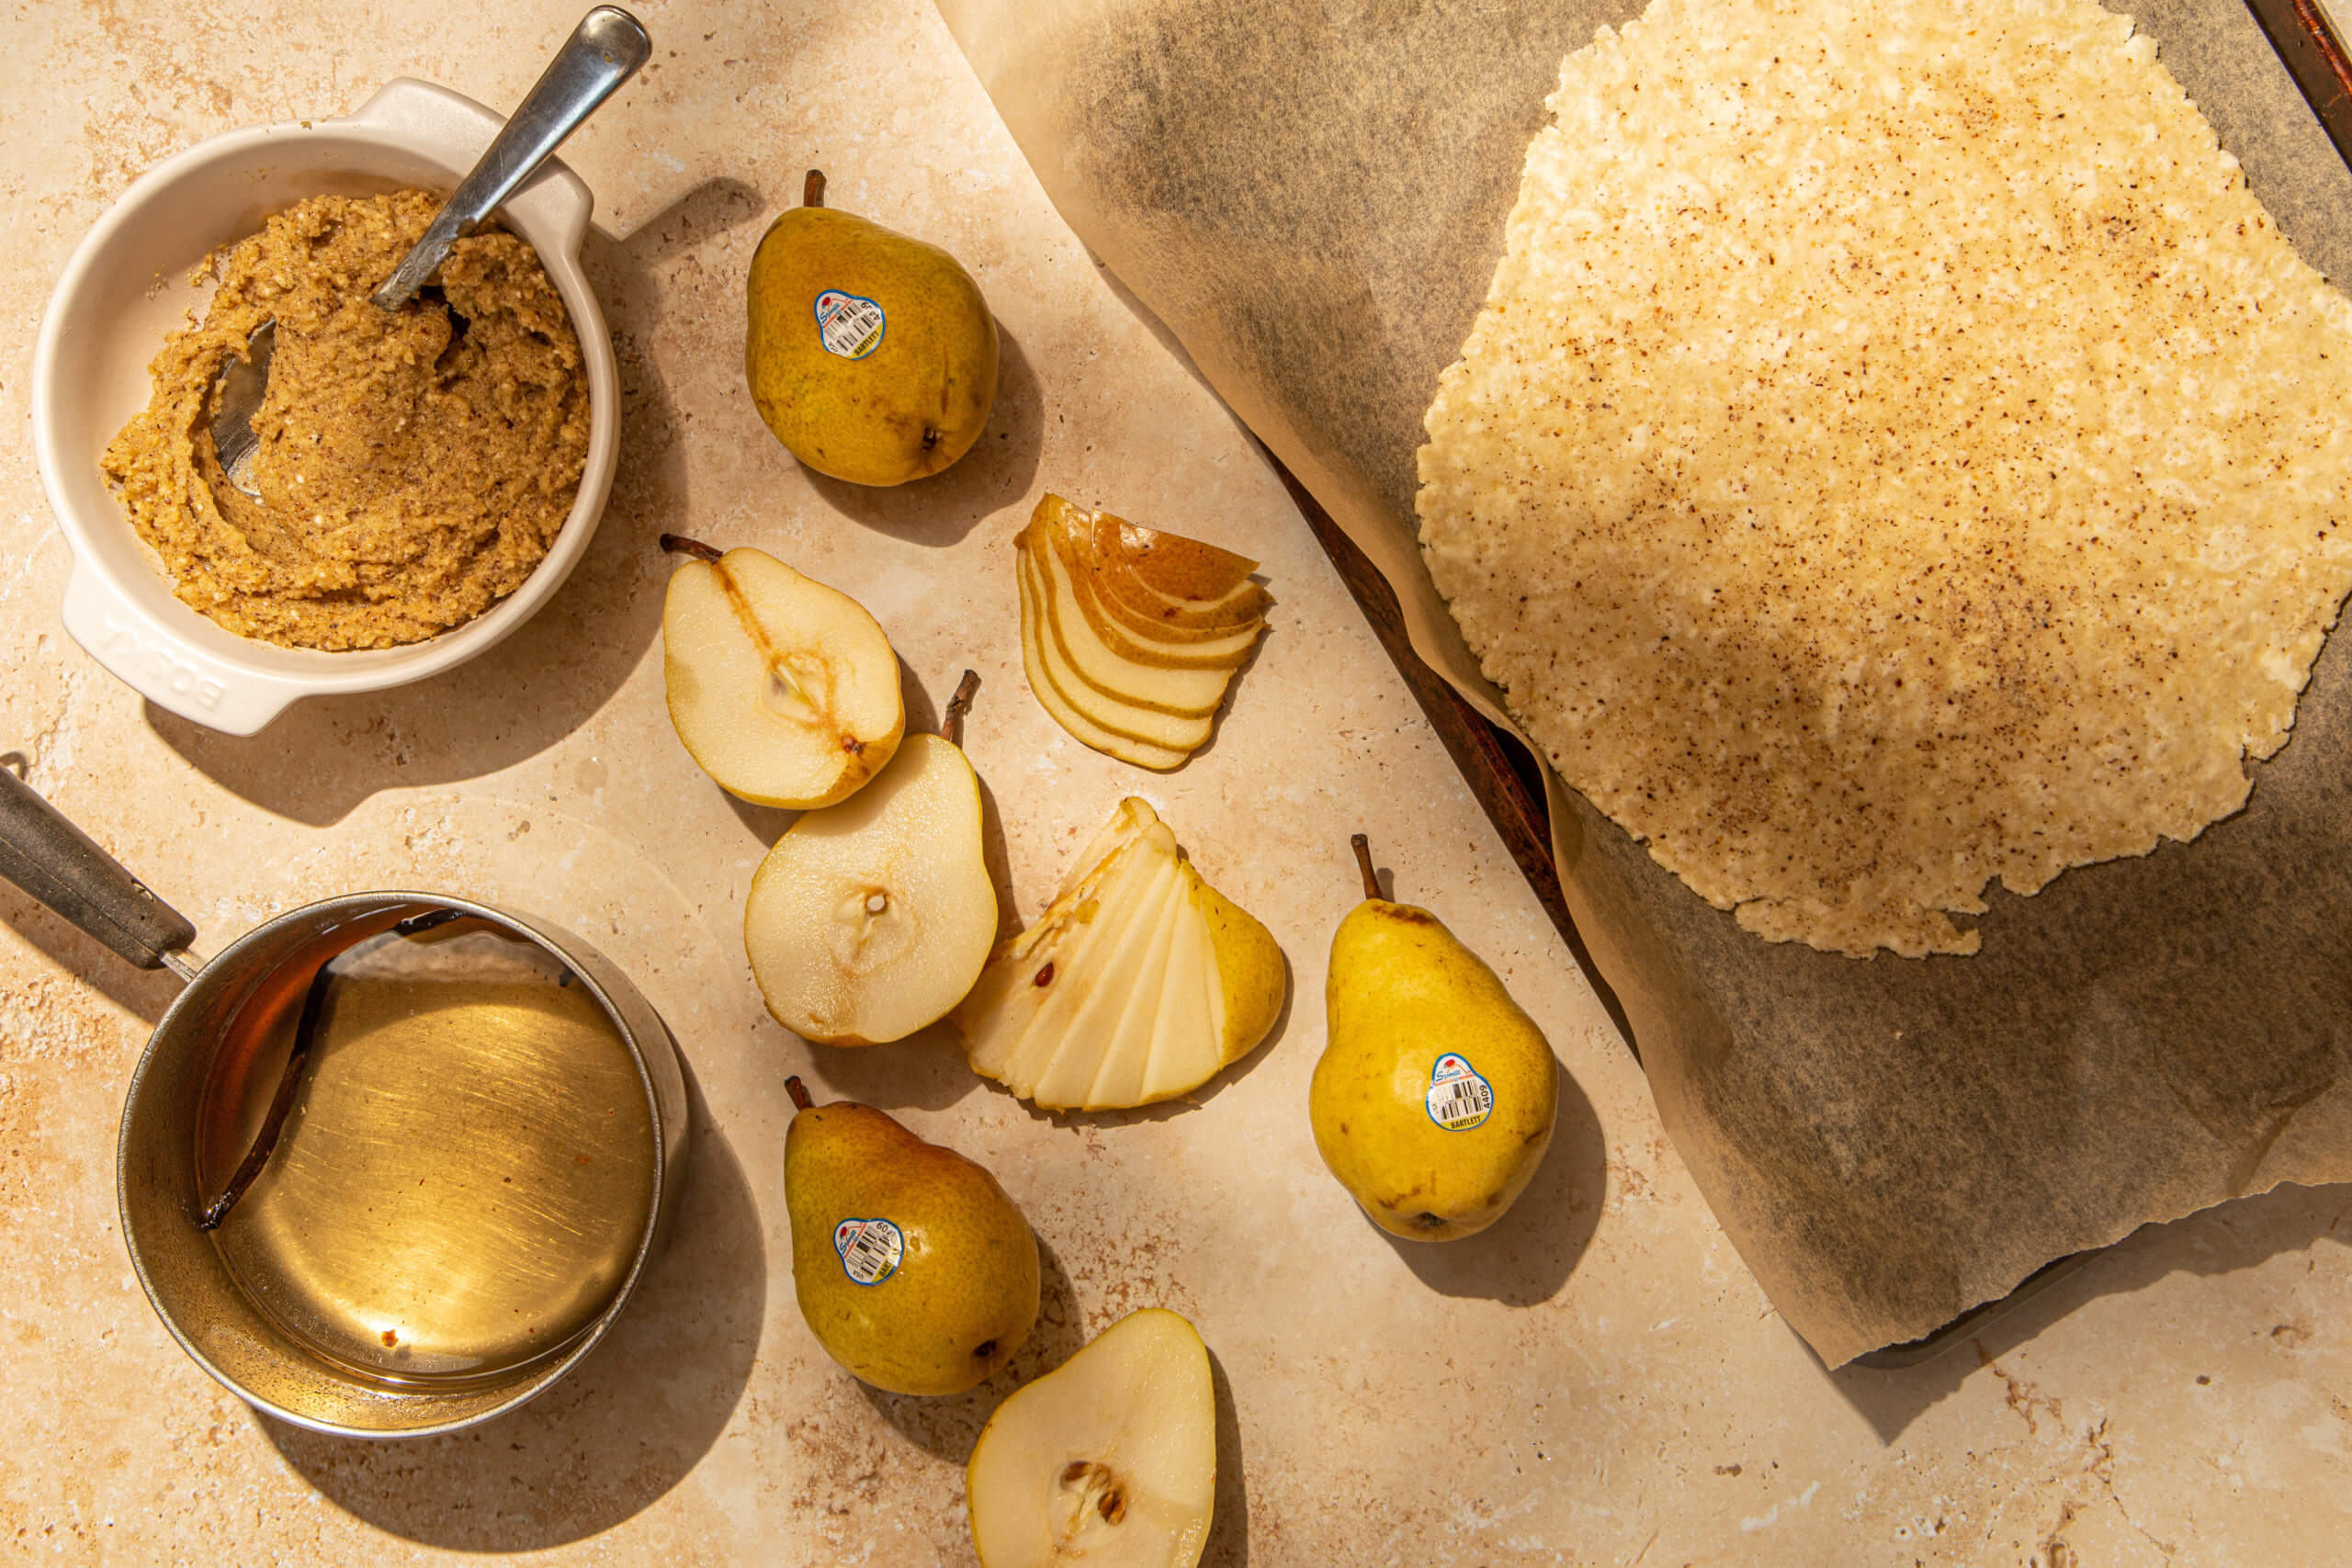 Sliced pears and other galette ingredients prior to building